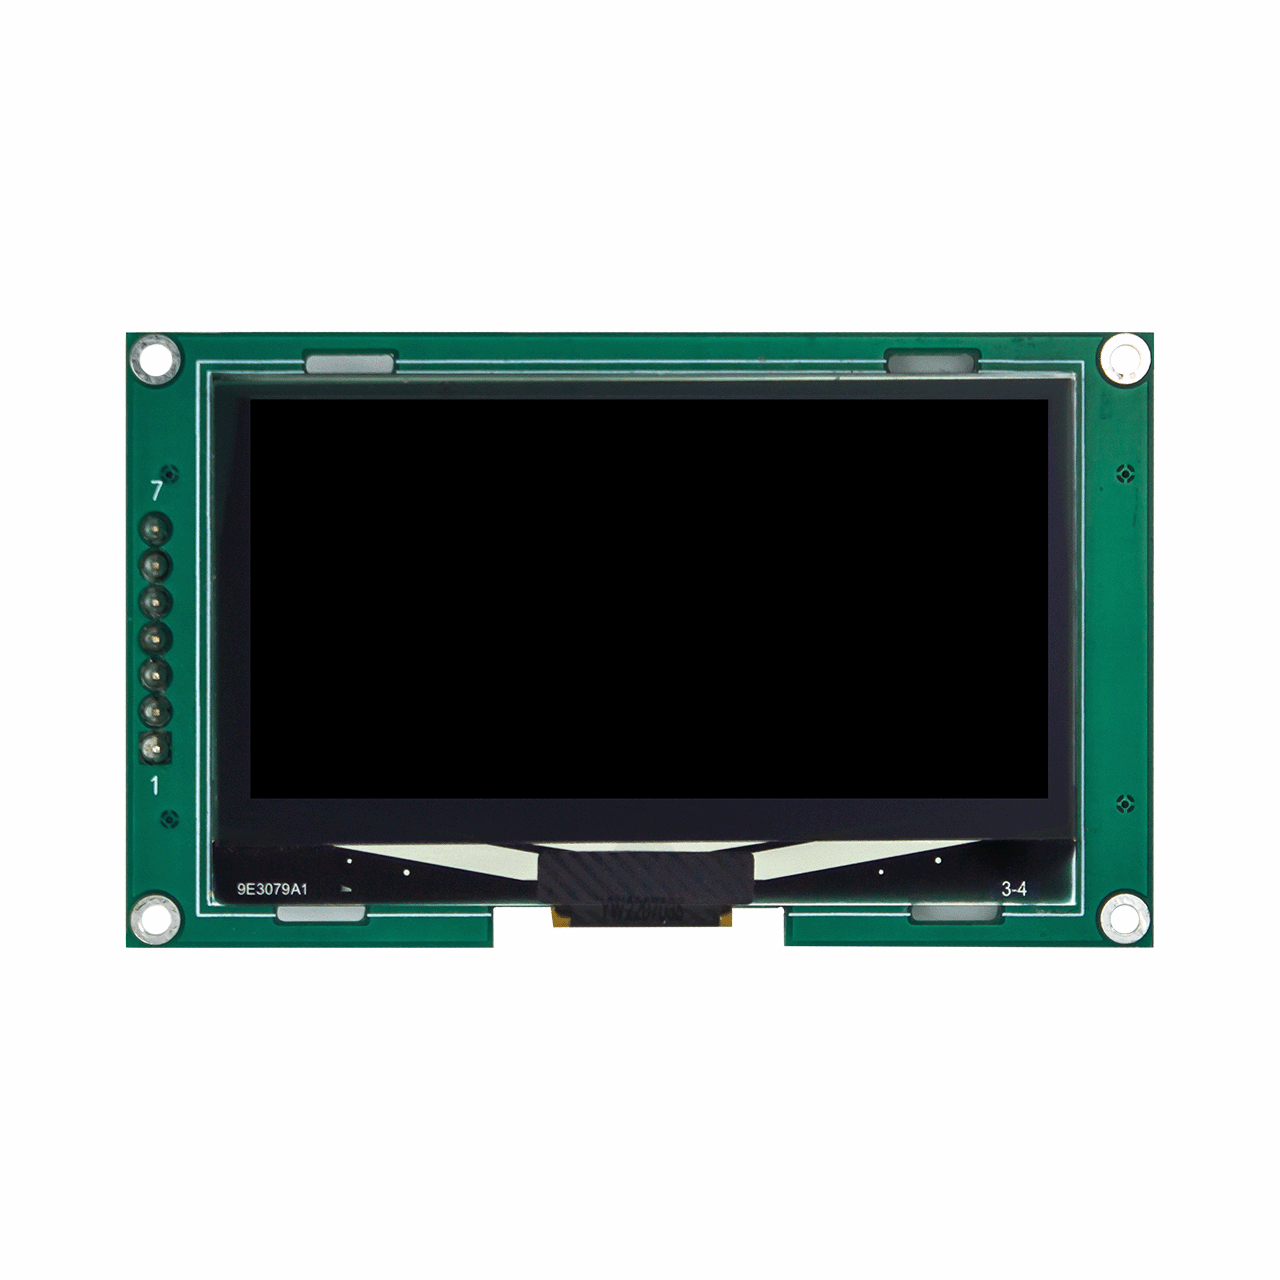 128x64 2.4 inch Mono DISPLAY BLUE OLED Graphic OLED Module SSD1309